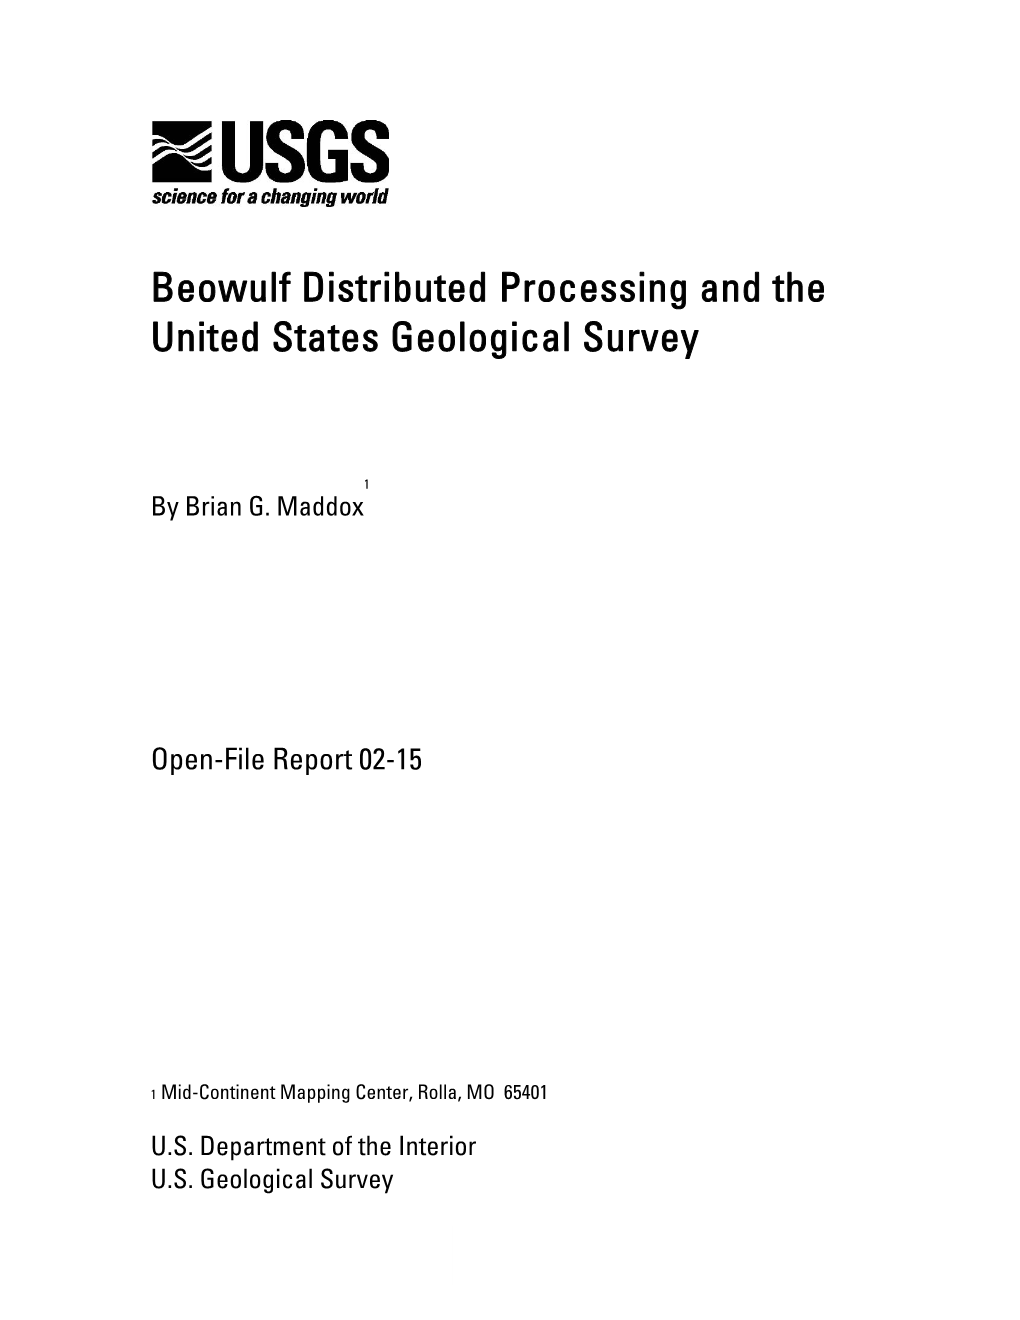 Beowulf Distributed Processing and the United States Geological Survey